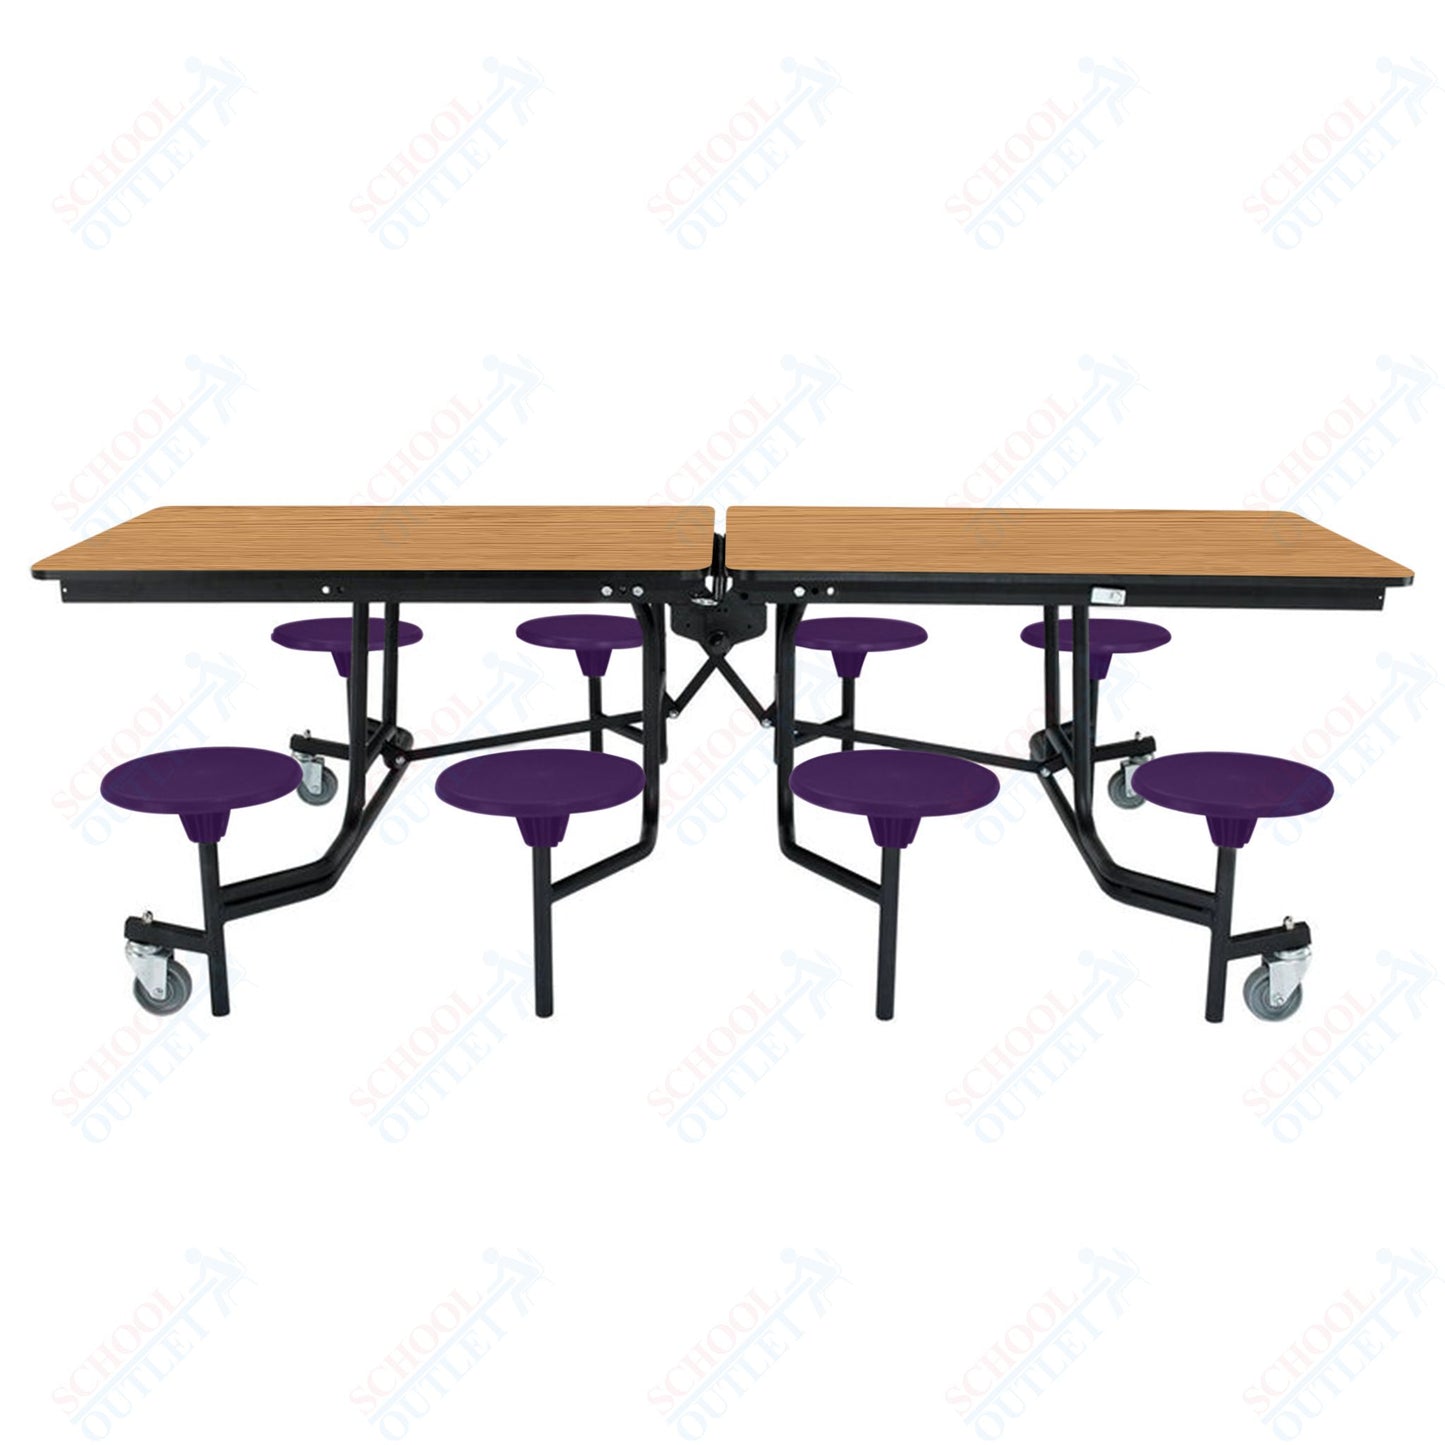 NPS Mobile Cafeteria Table - 30" W x 8' L - 8 Stools - Particleboard Core - T-Molding Edge - Chrome Frame